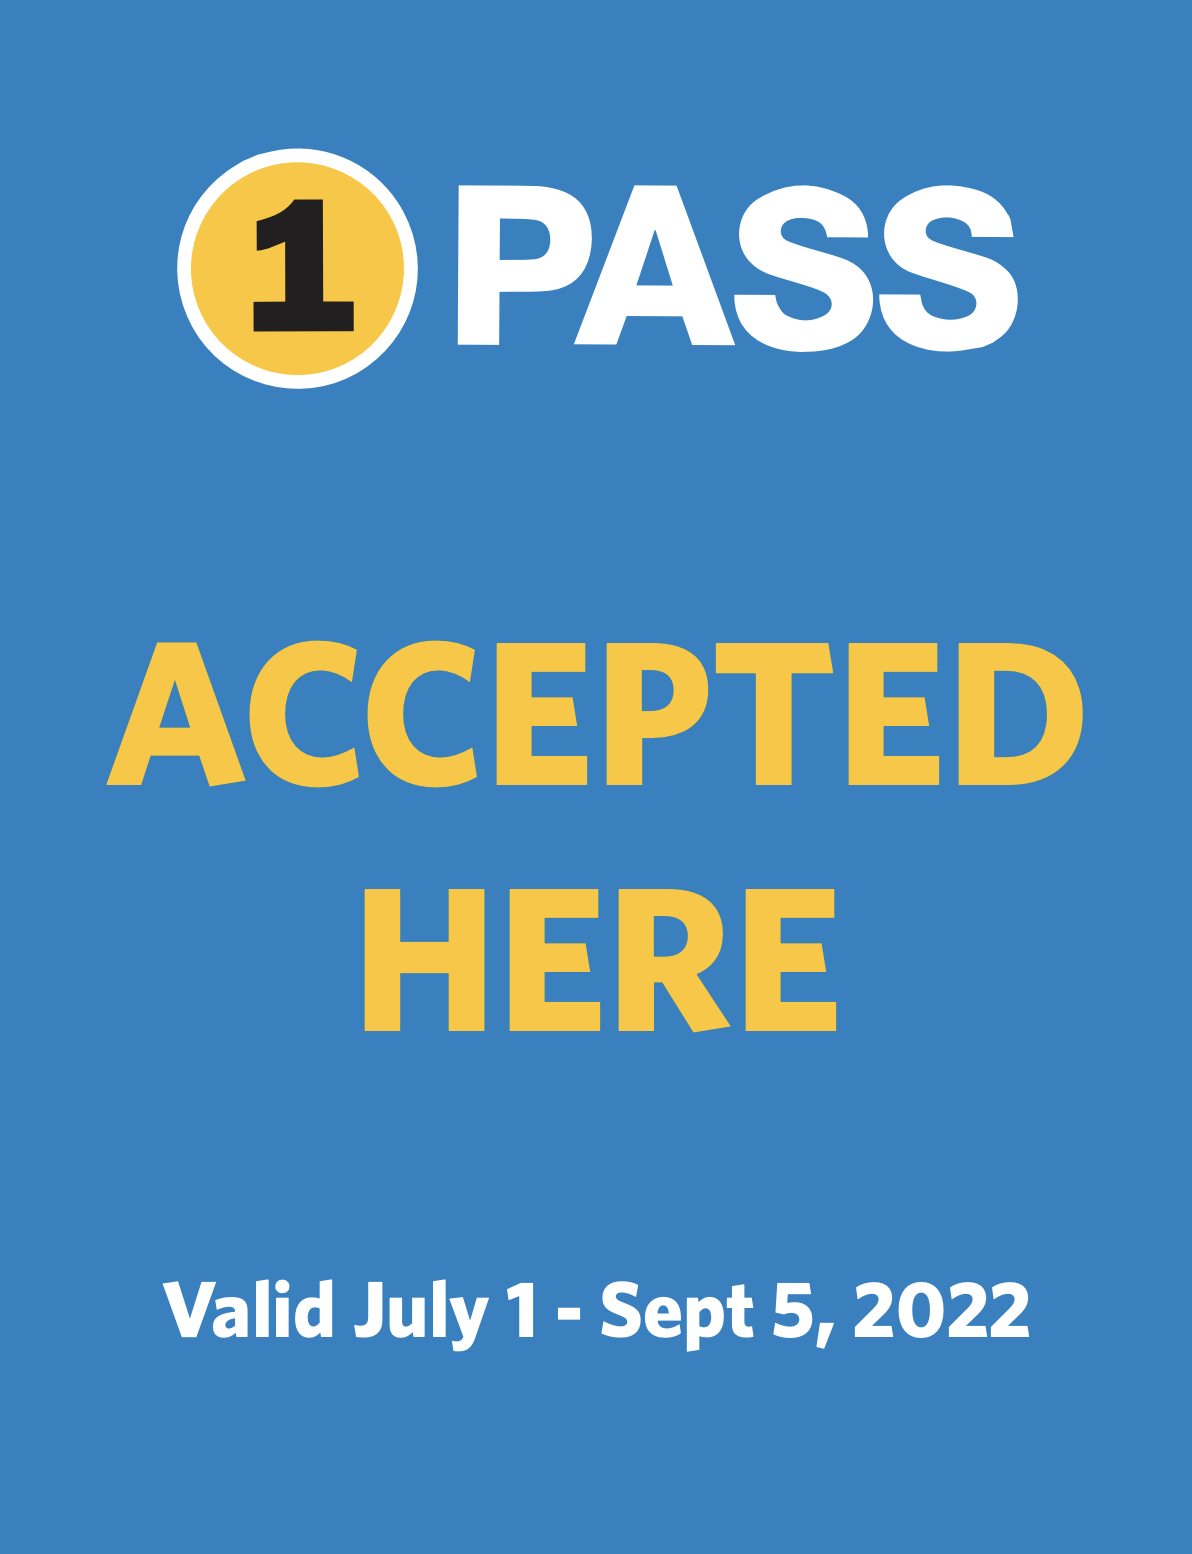 1Pass accepted here July 1 through September 5